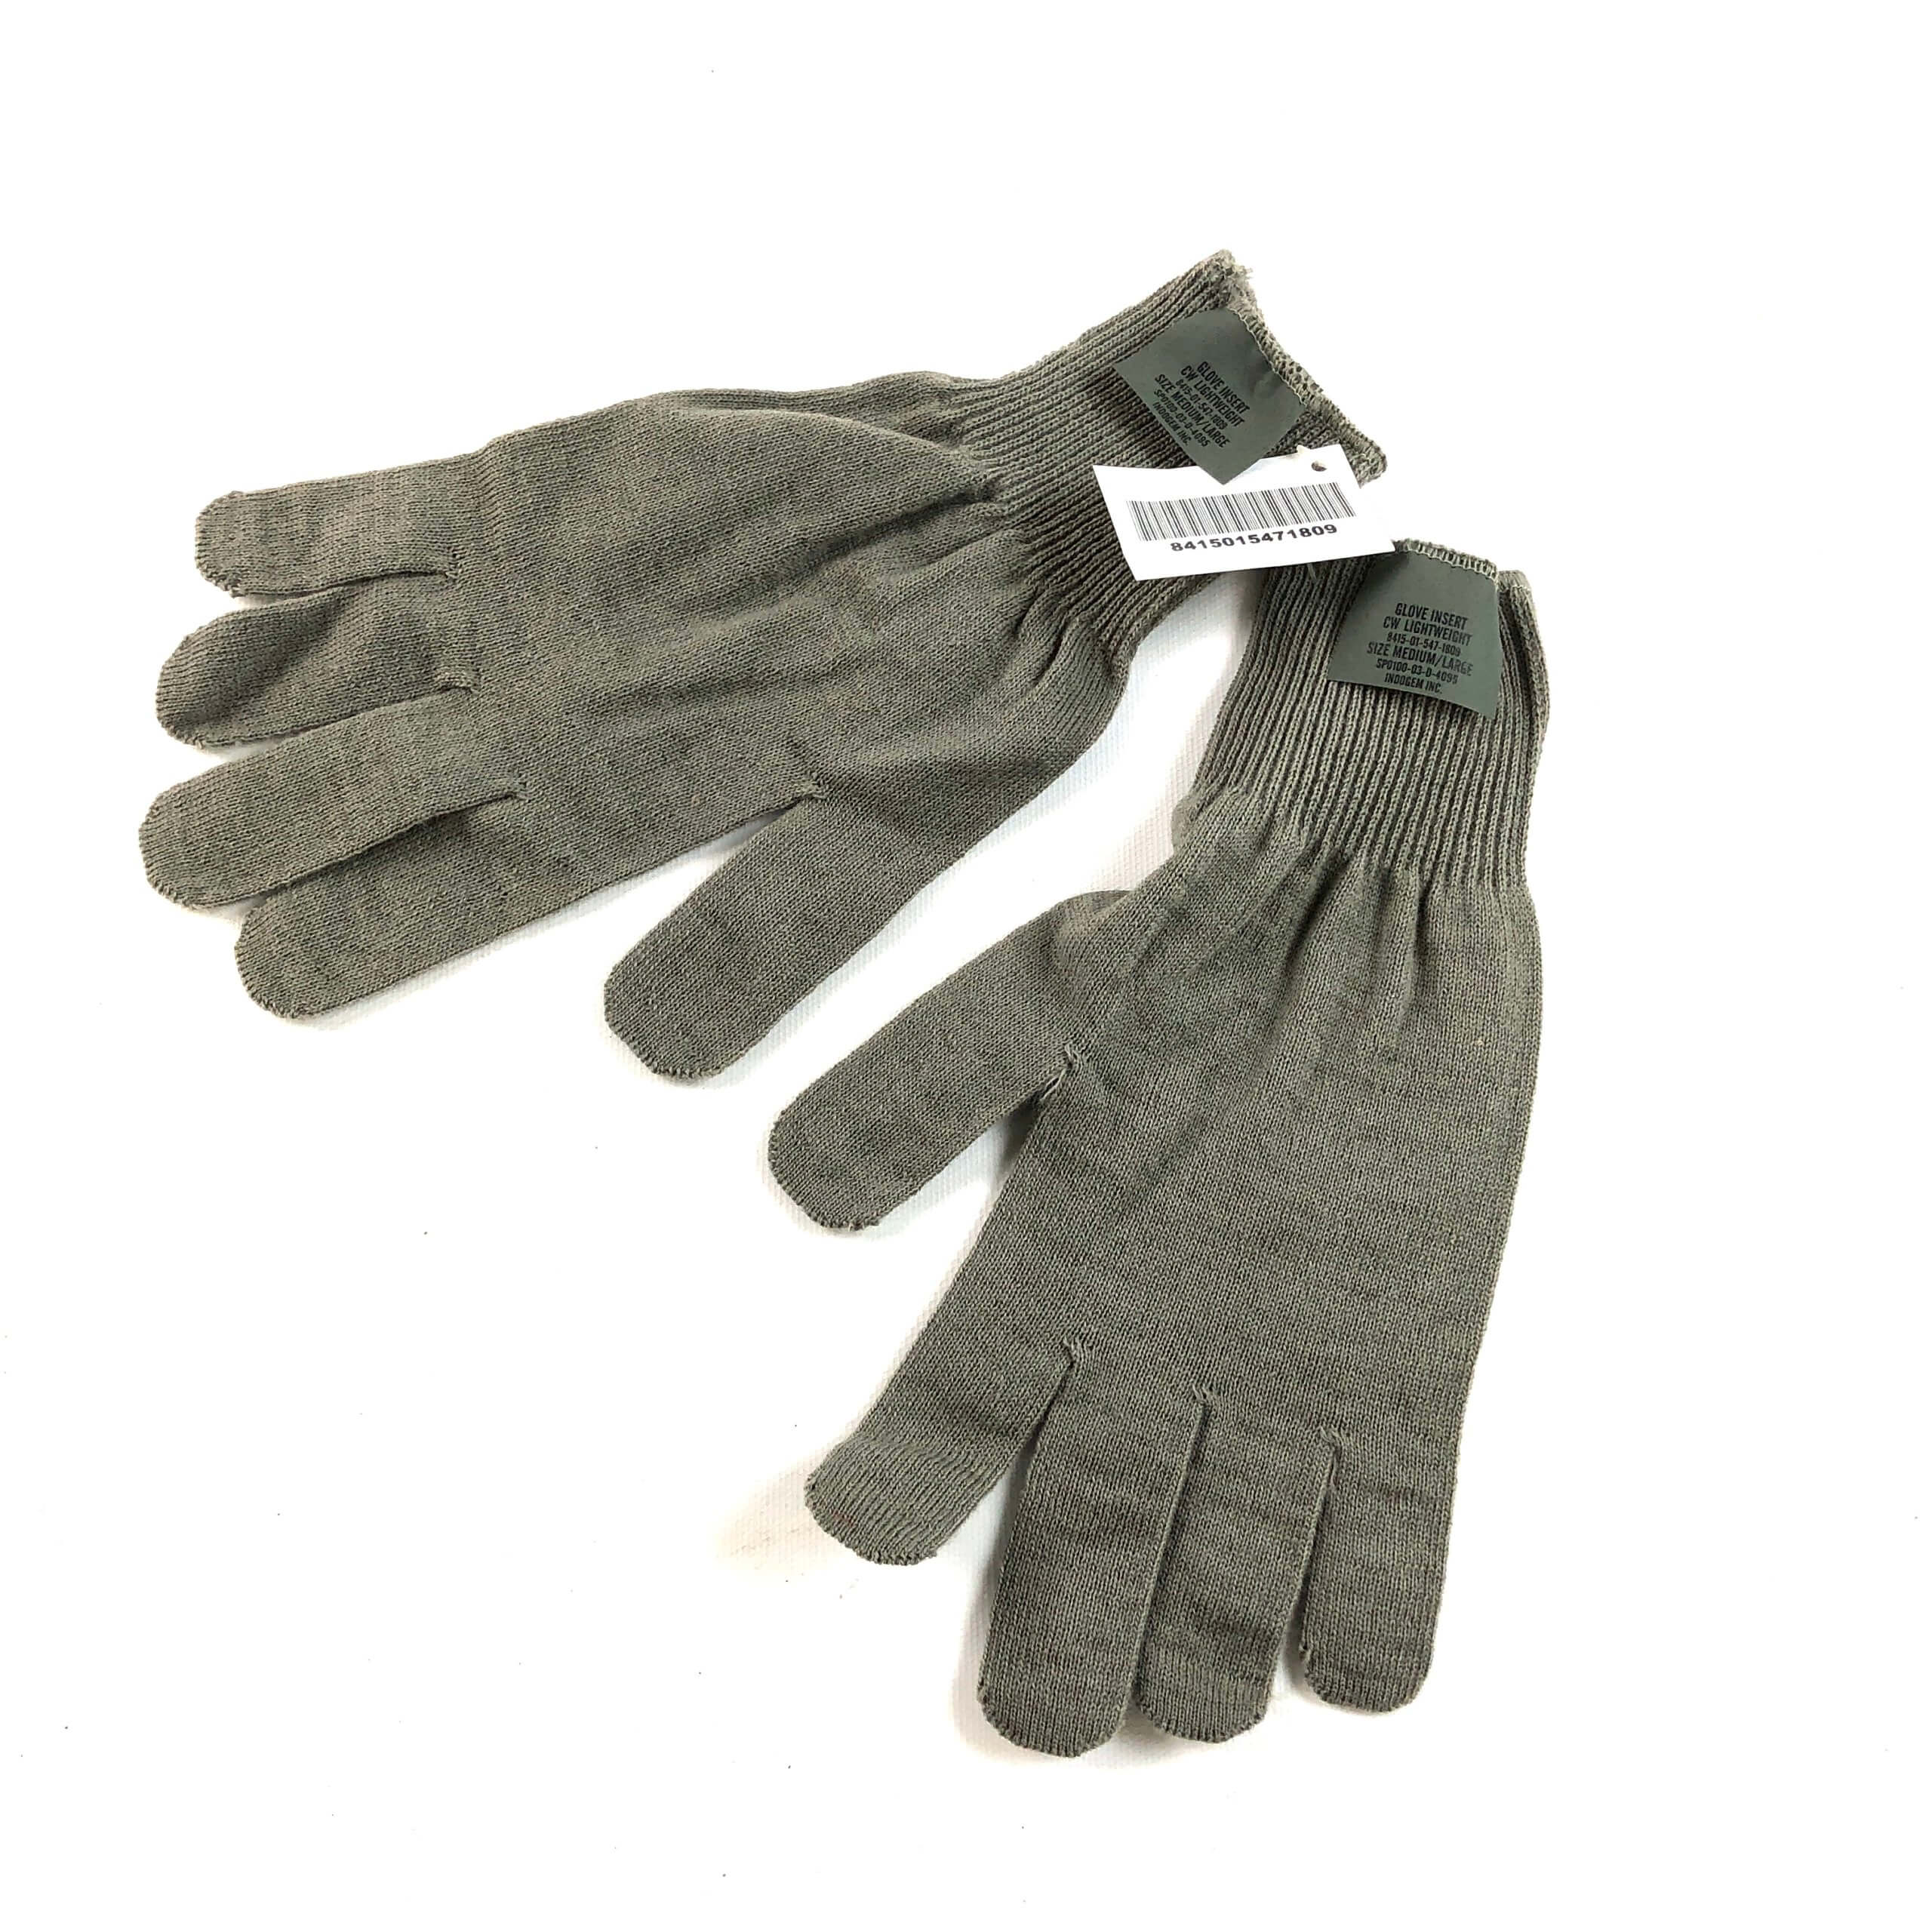 LARGE U.S MILITARY ISSUE COLD WEATHER GLOVE INSERTS LINERS SIZE X 